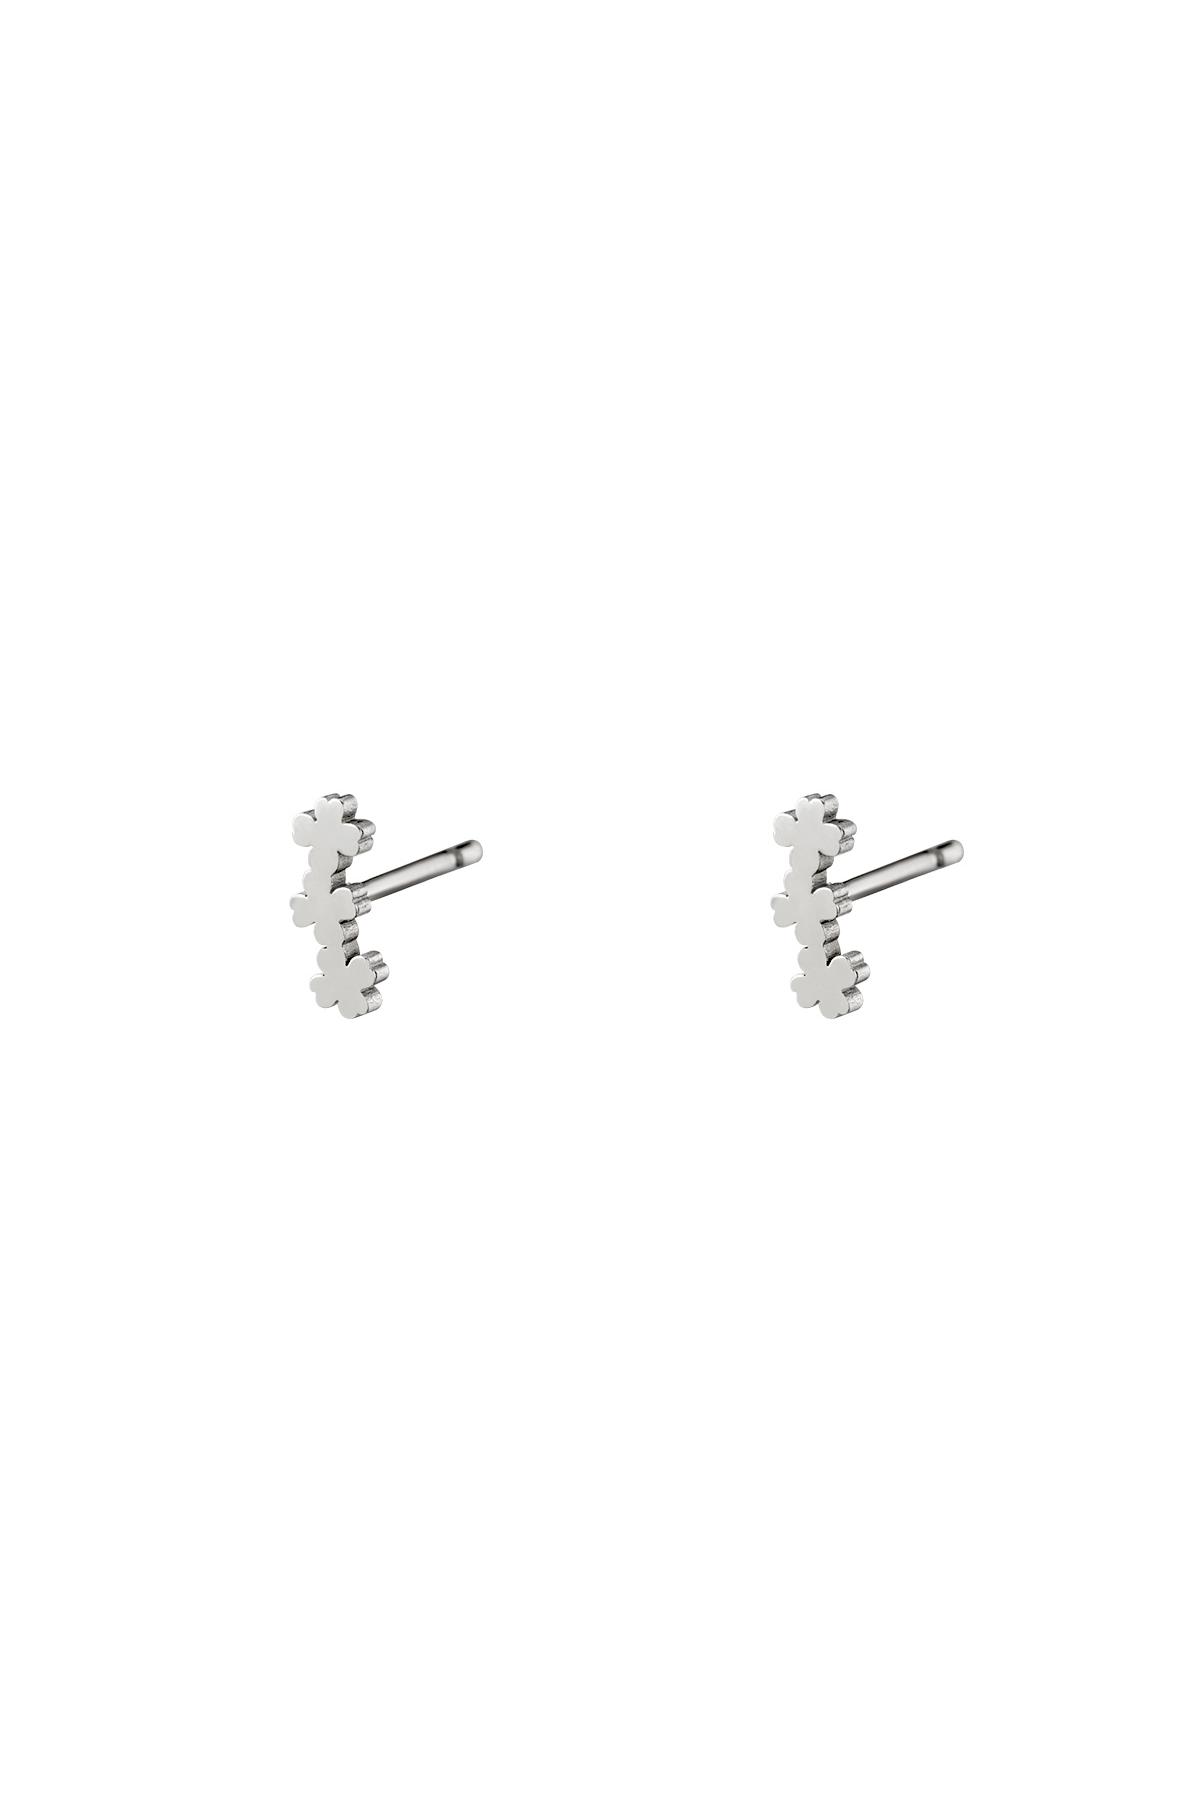 Stainless Steel Earstuds Three Clovers Silver h5 